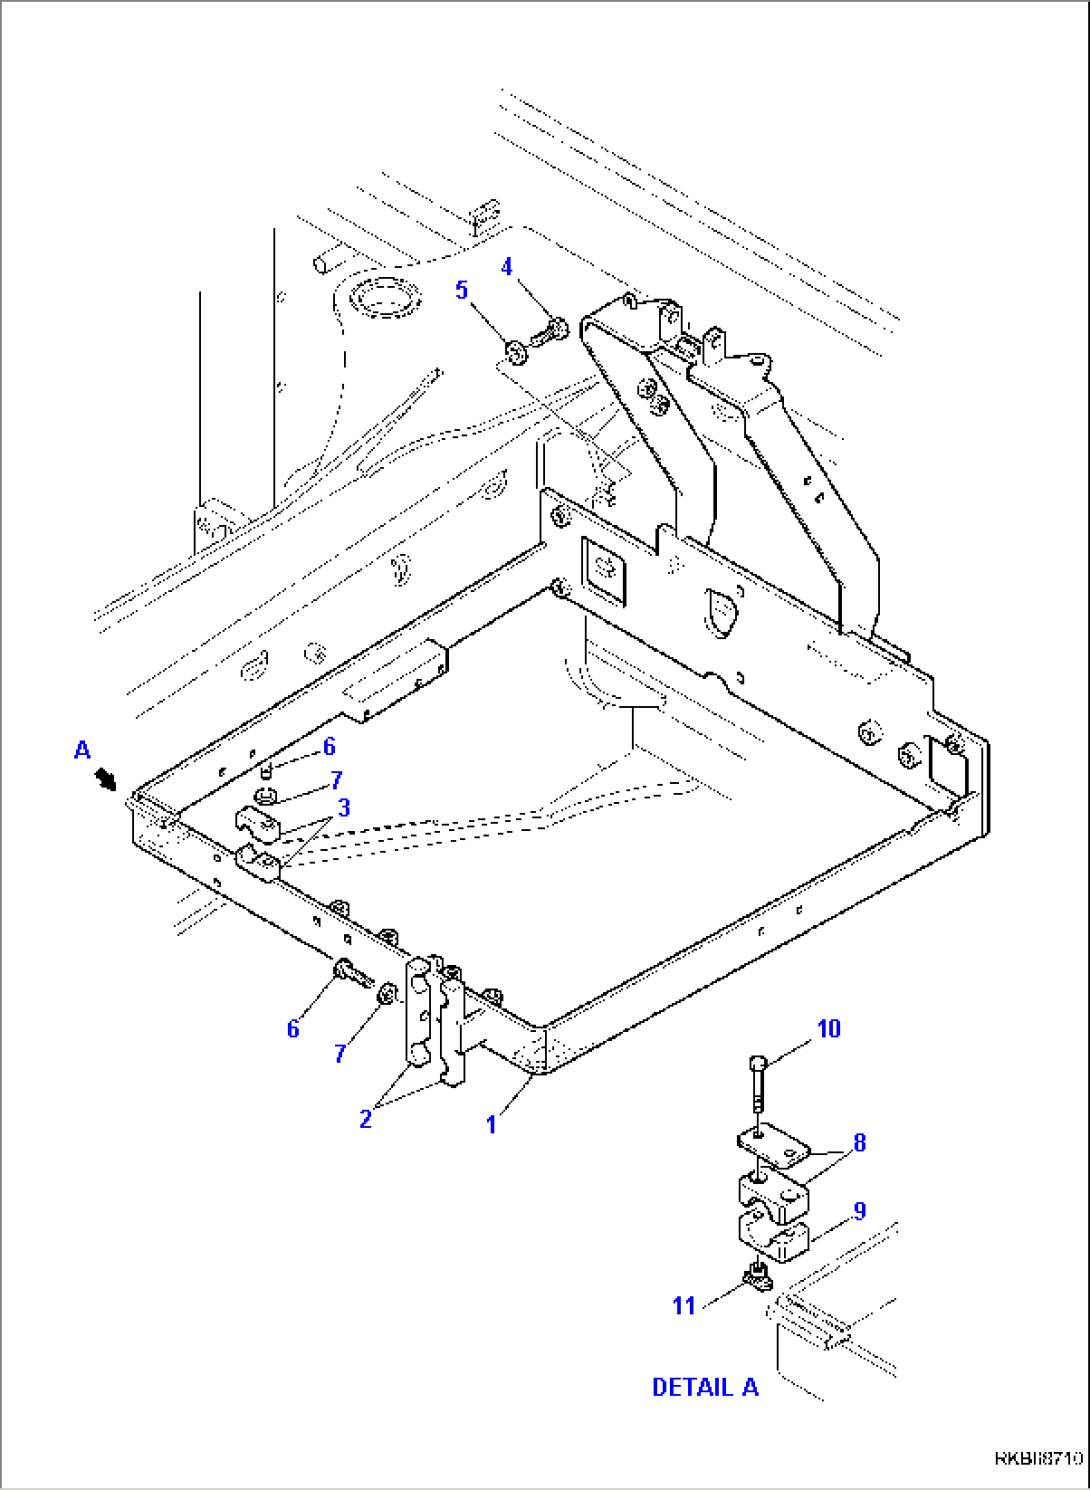 MAIN VALVE SUPPORT (WITH MECHANICAL CONTROL)